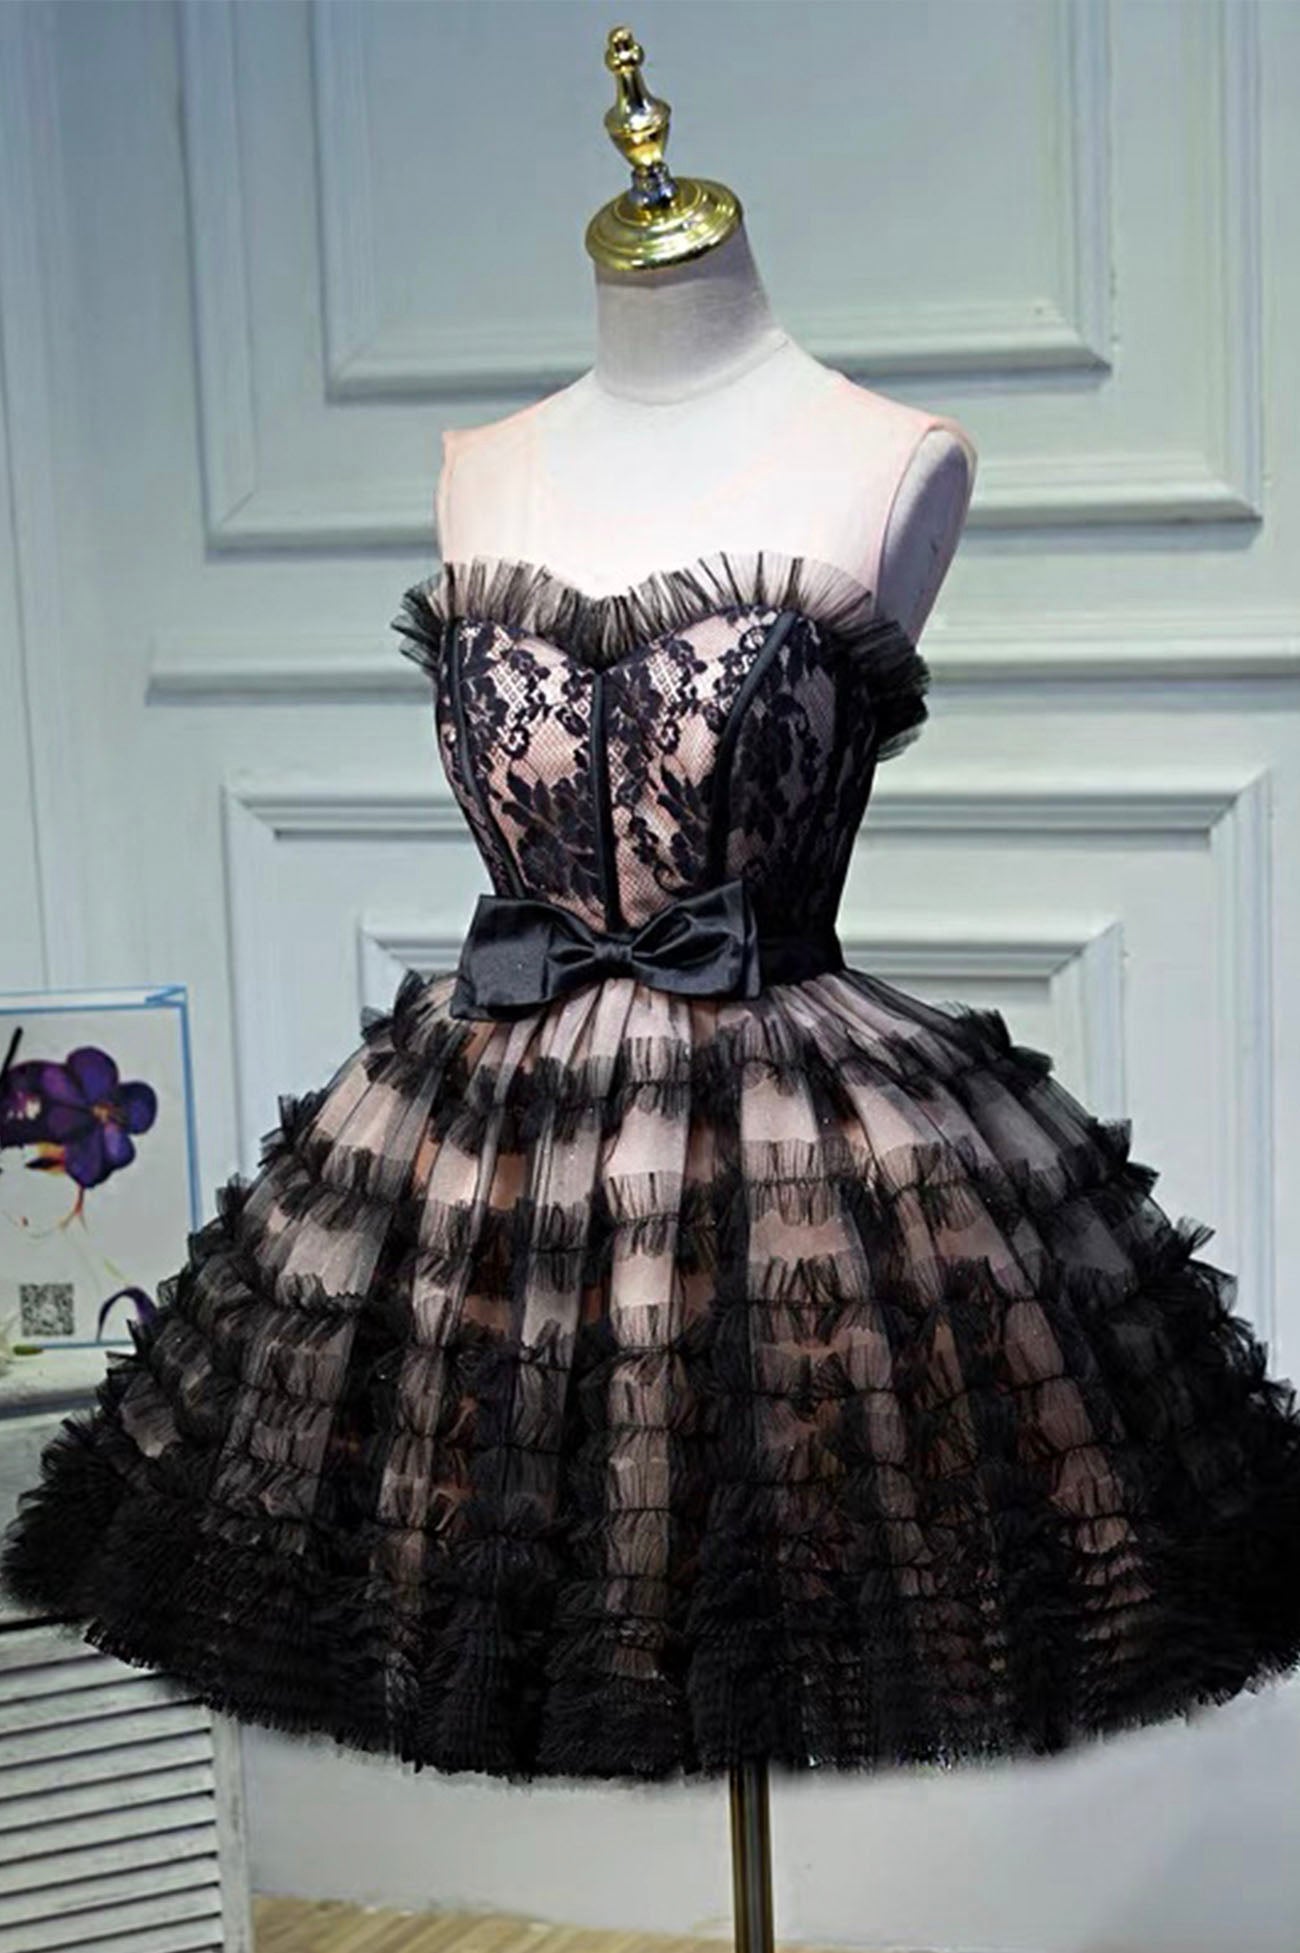 Black Tulle Lace Short Corset Prom Dress, A-Line Black Corset Homecoming Dress outfit, Prom Dress Pink